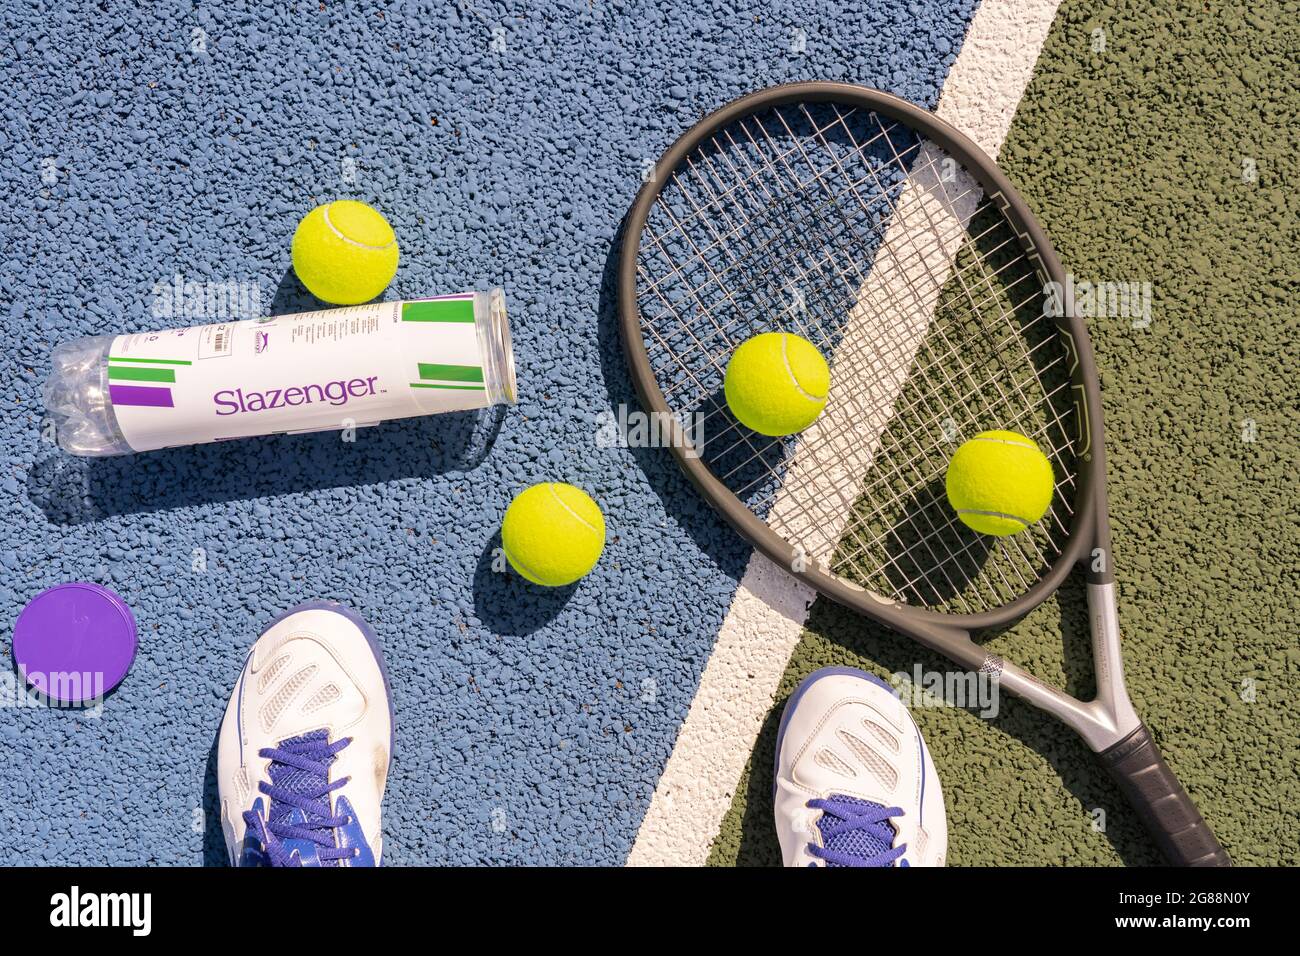 Looking down on a man's feet wearing trainers on a hard tennis court with a tennis racket and fluorescent yellow (optic yellow) tennis balls Stock Photo